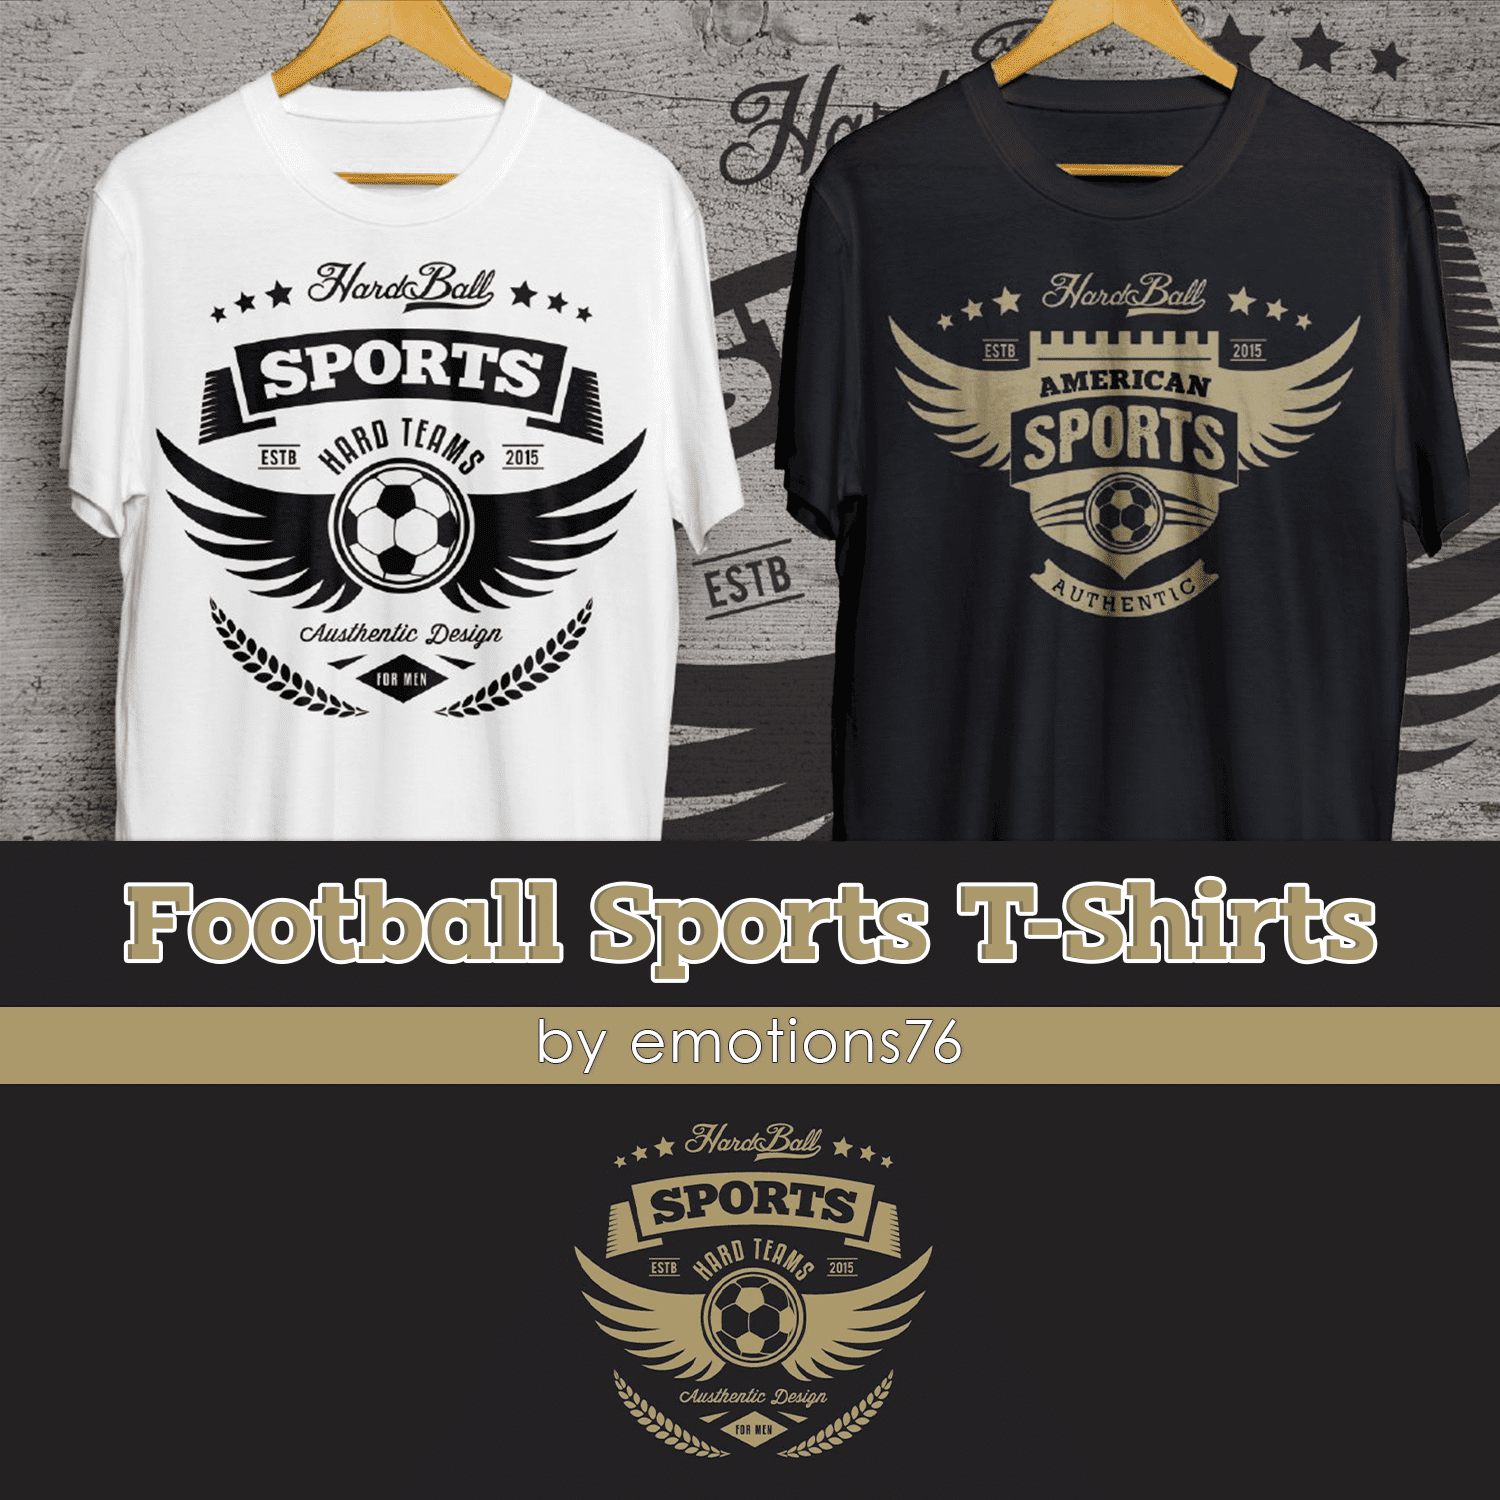 Football Sports T-Shirts cover.